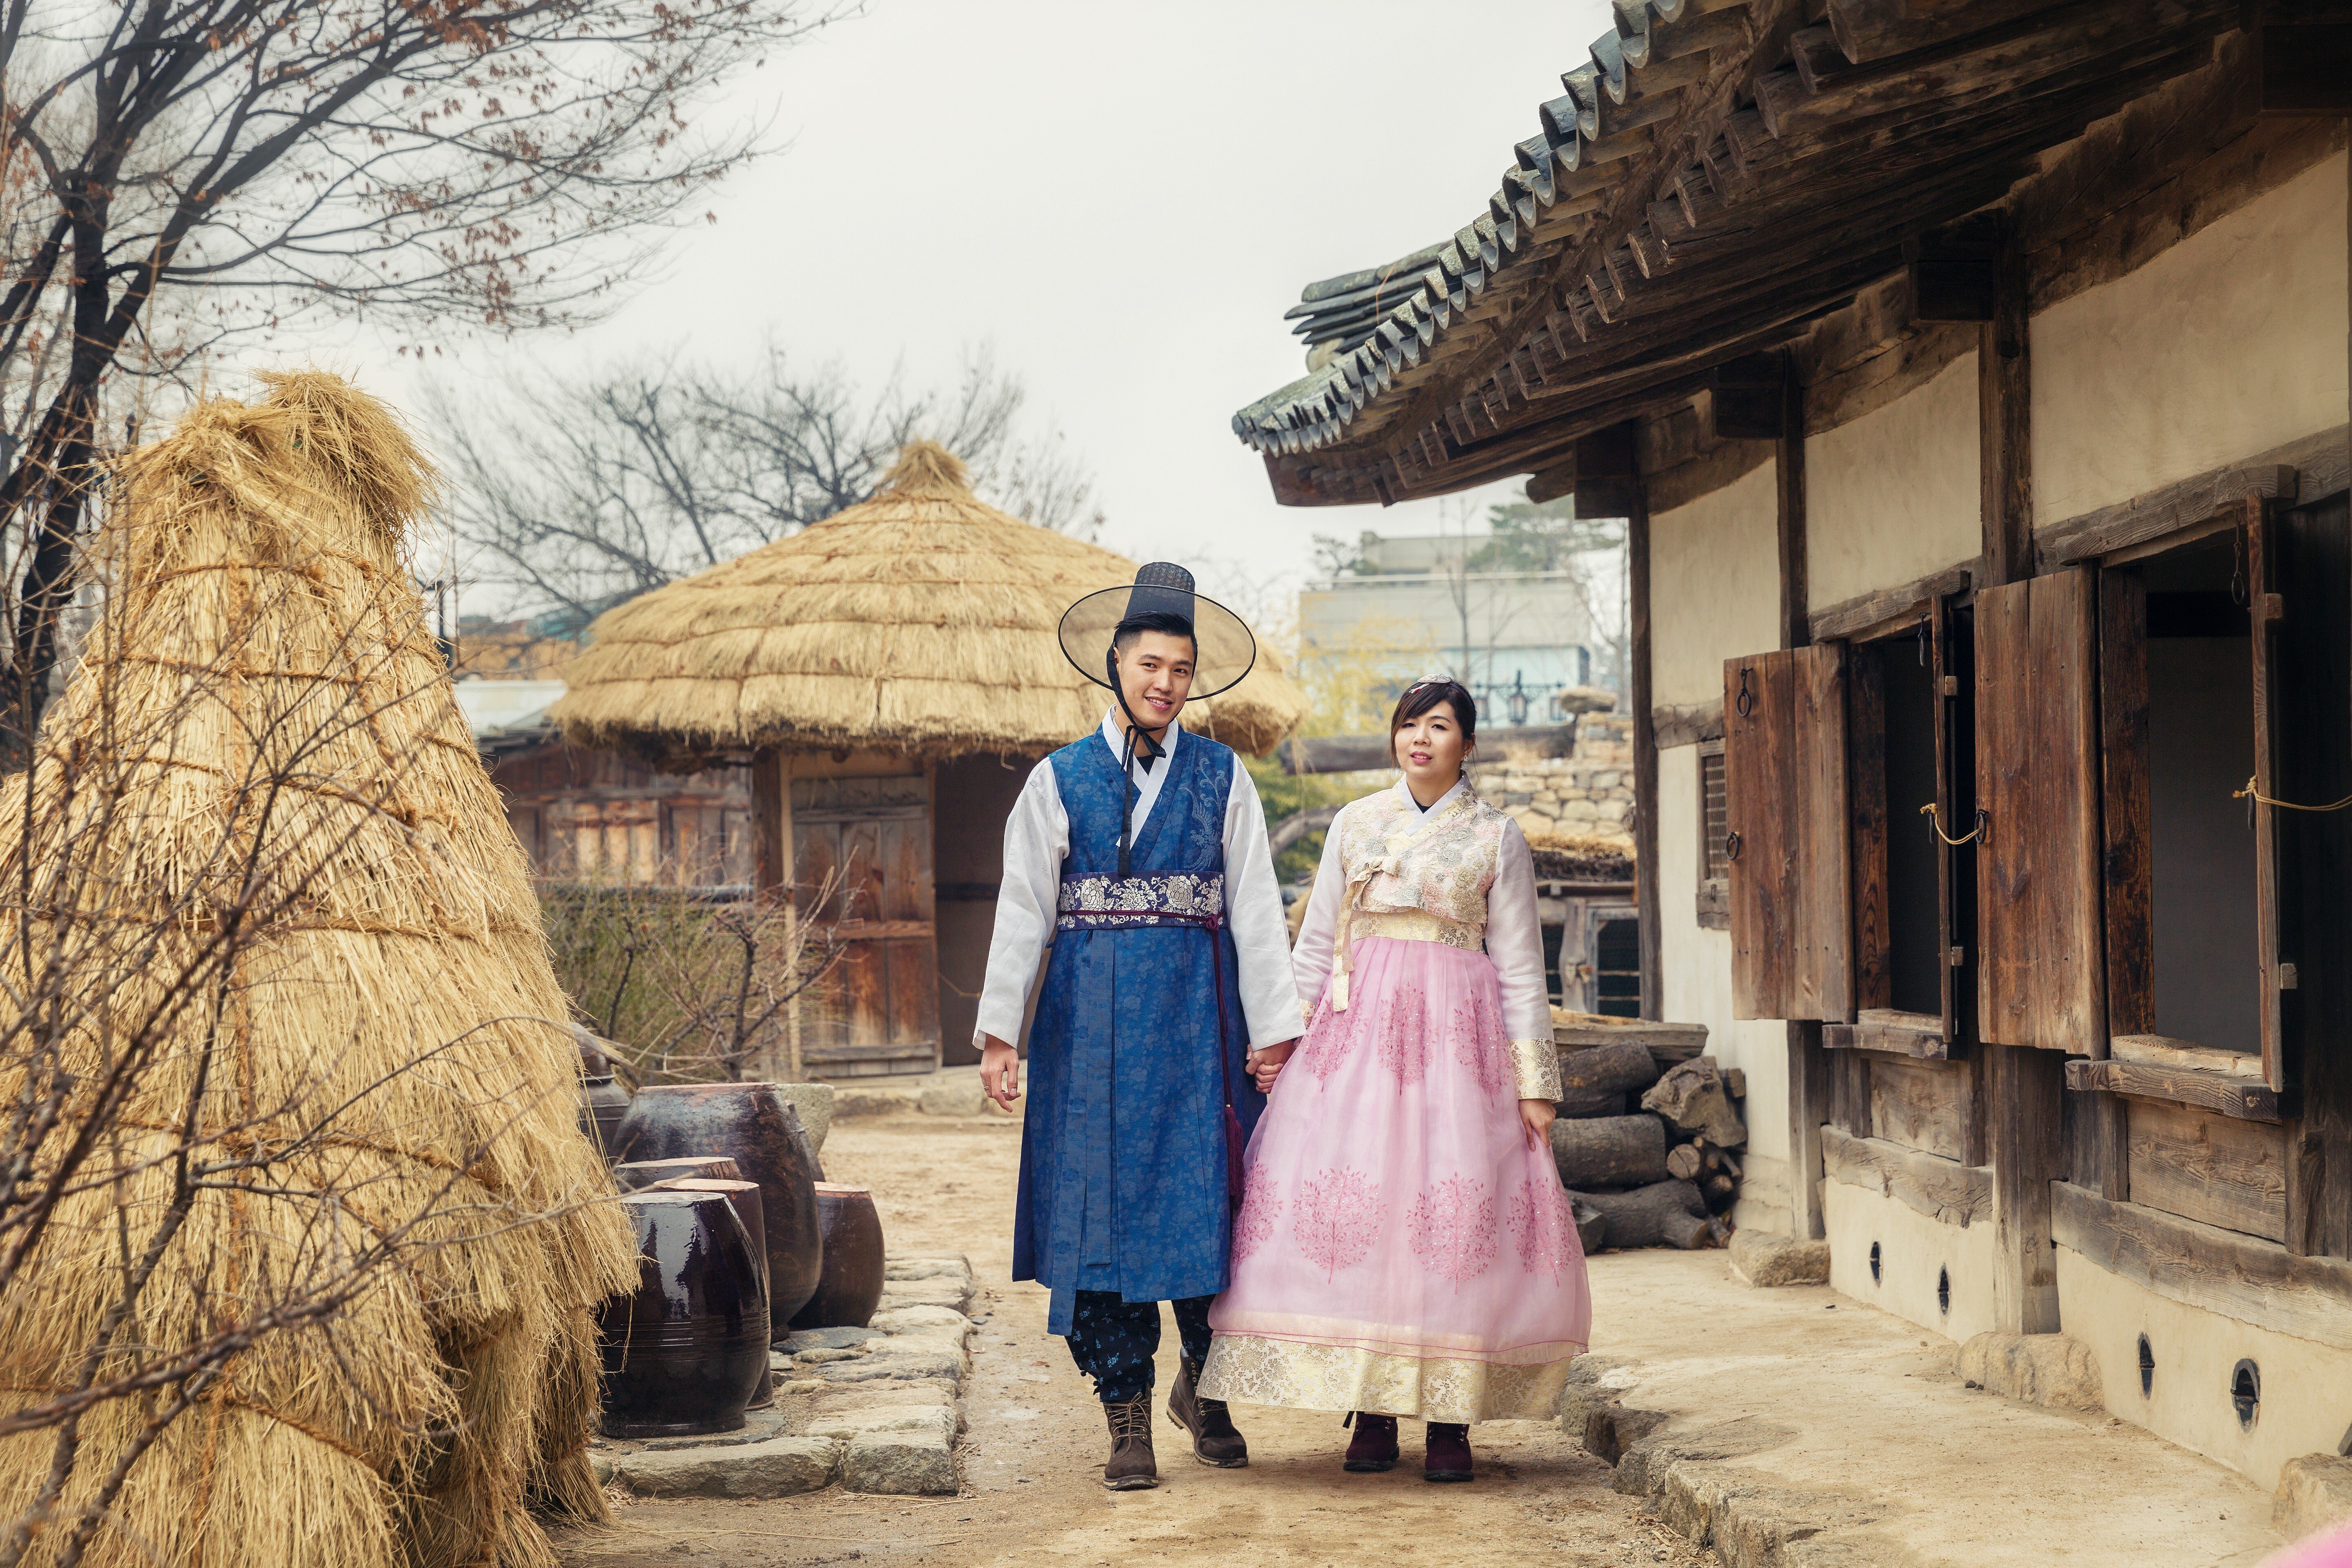 Hanbok is mostly worn for special occasions and photoshoots these days, but was considered daily dress until around 100 years ago.